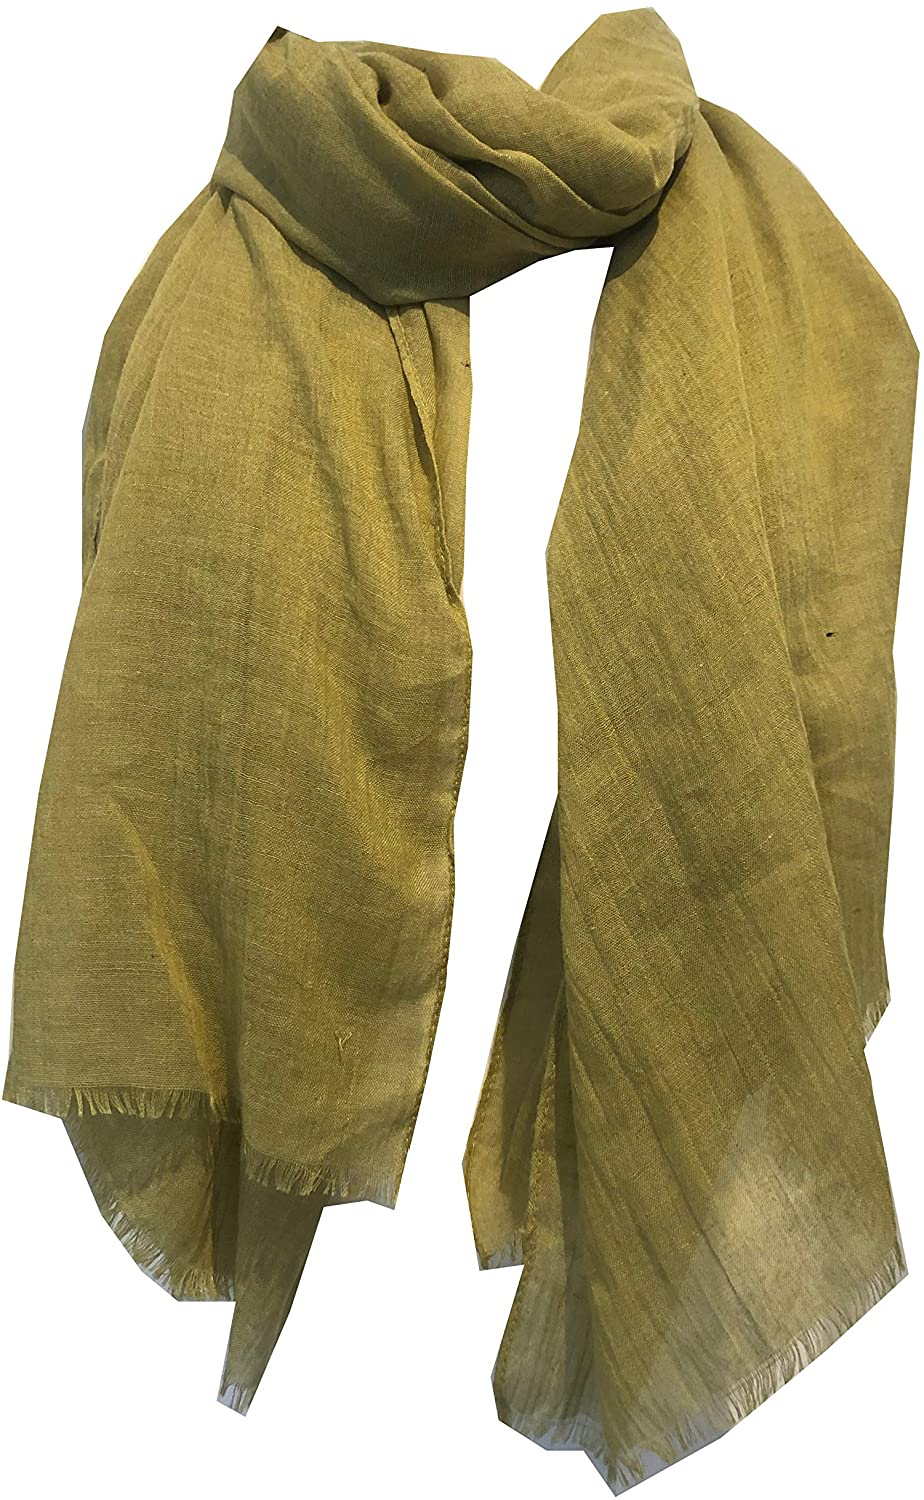 Pamper Yourself Now Mustard Plain Soft Long Scarf/wrap with Frayed Edge